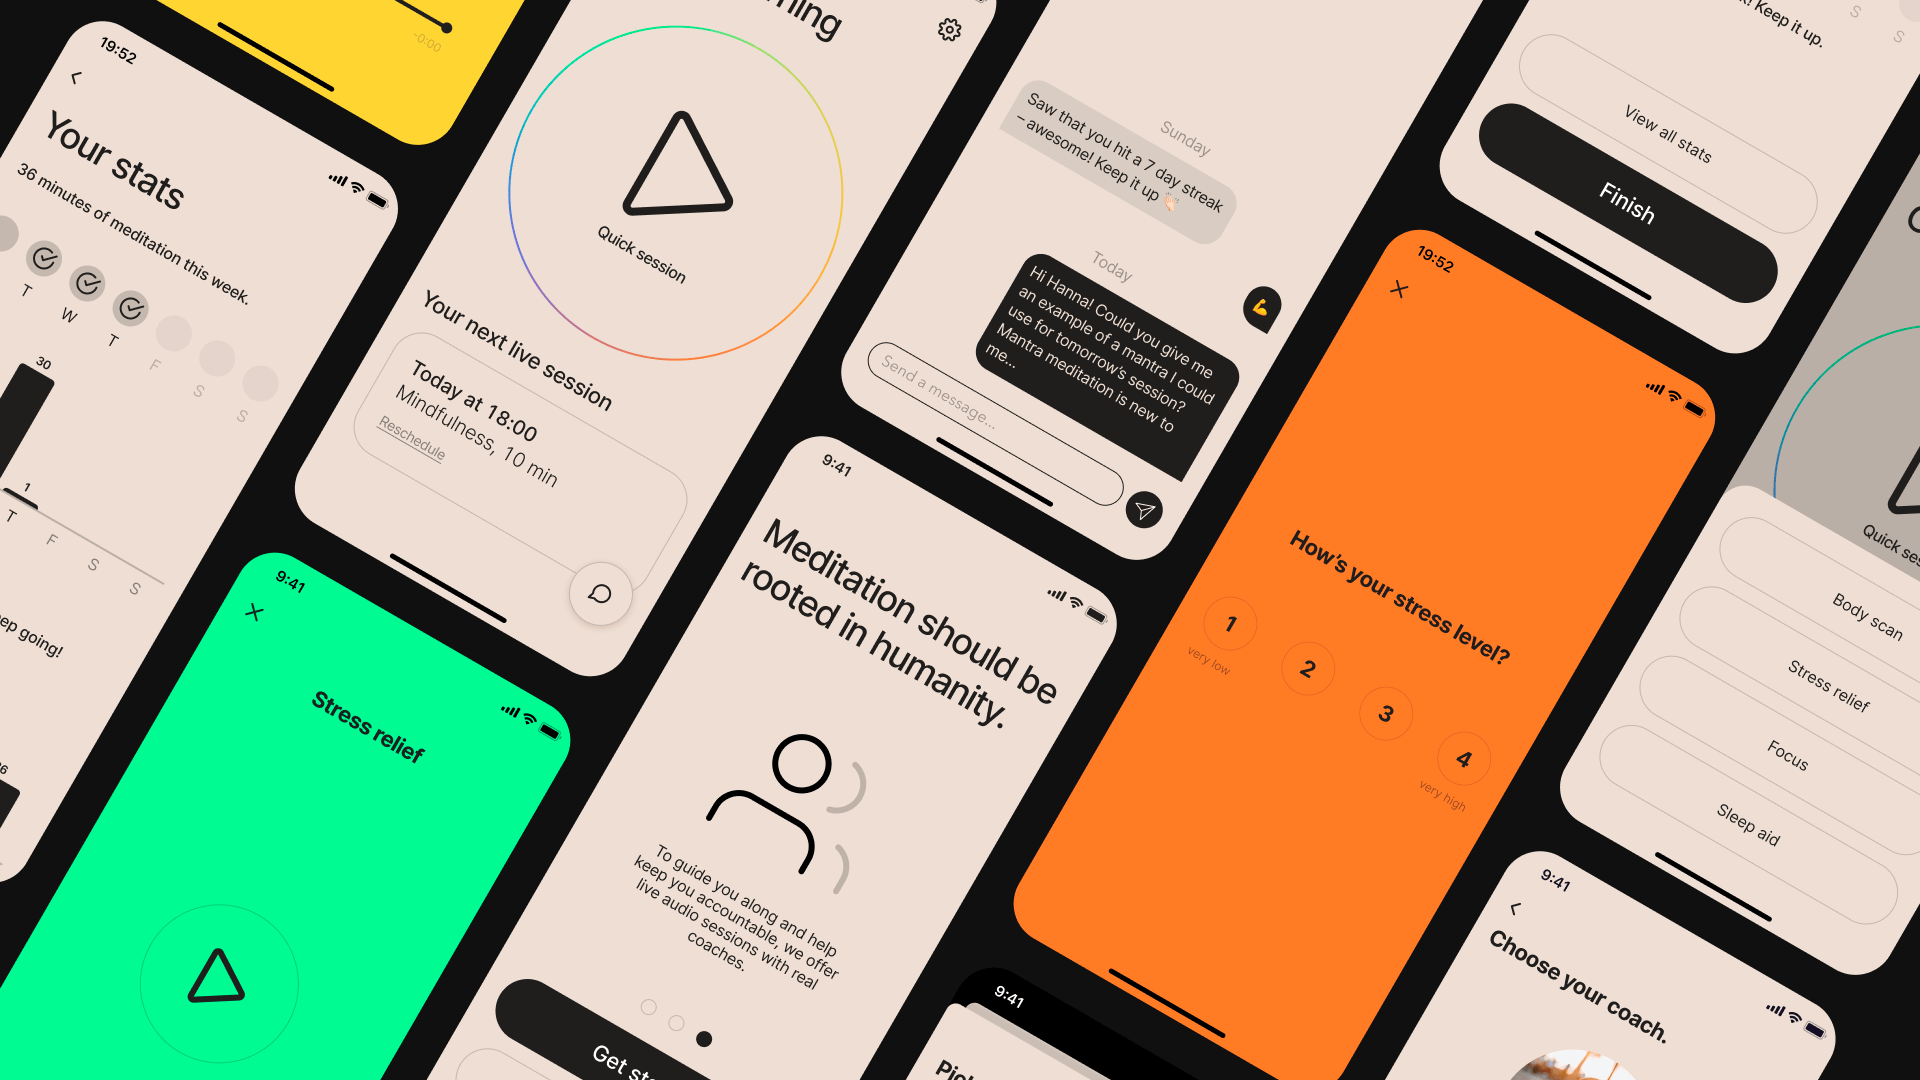 A collection of app screens from the NWI Meditation app.